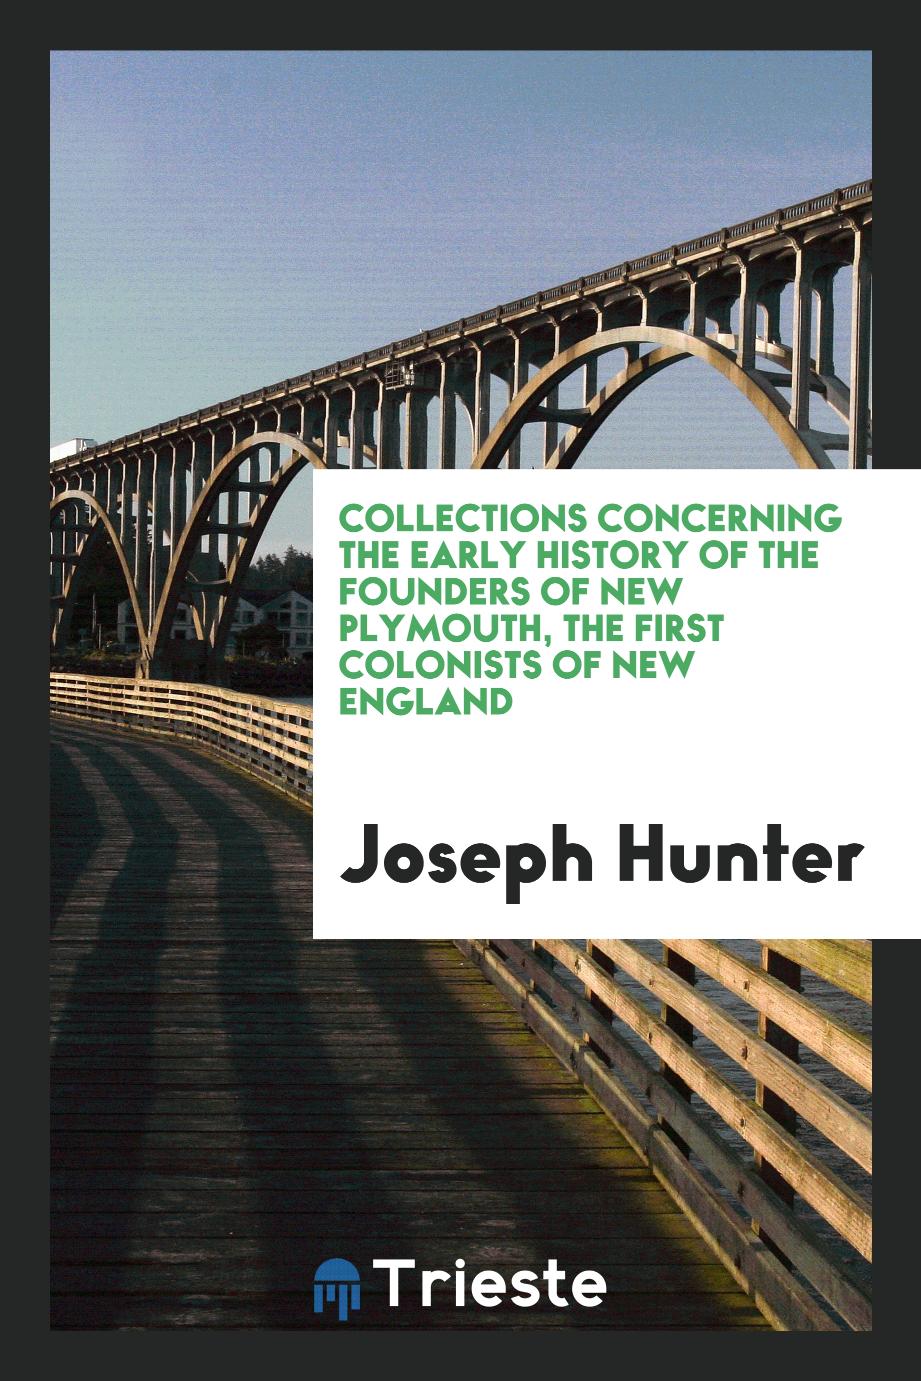 Collections concerning the early history of the founders of New Plymouth, the first colonists of New England